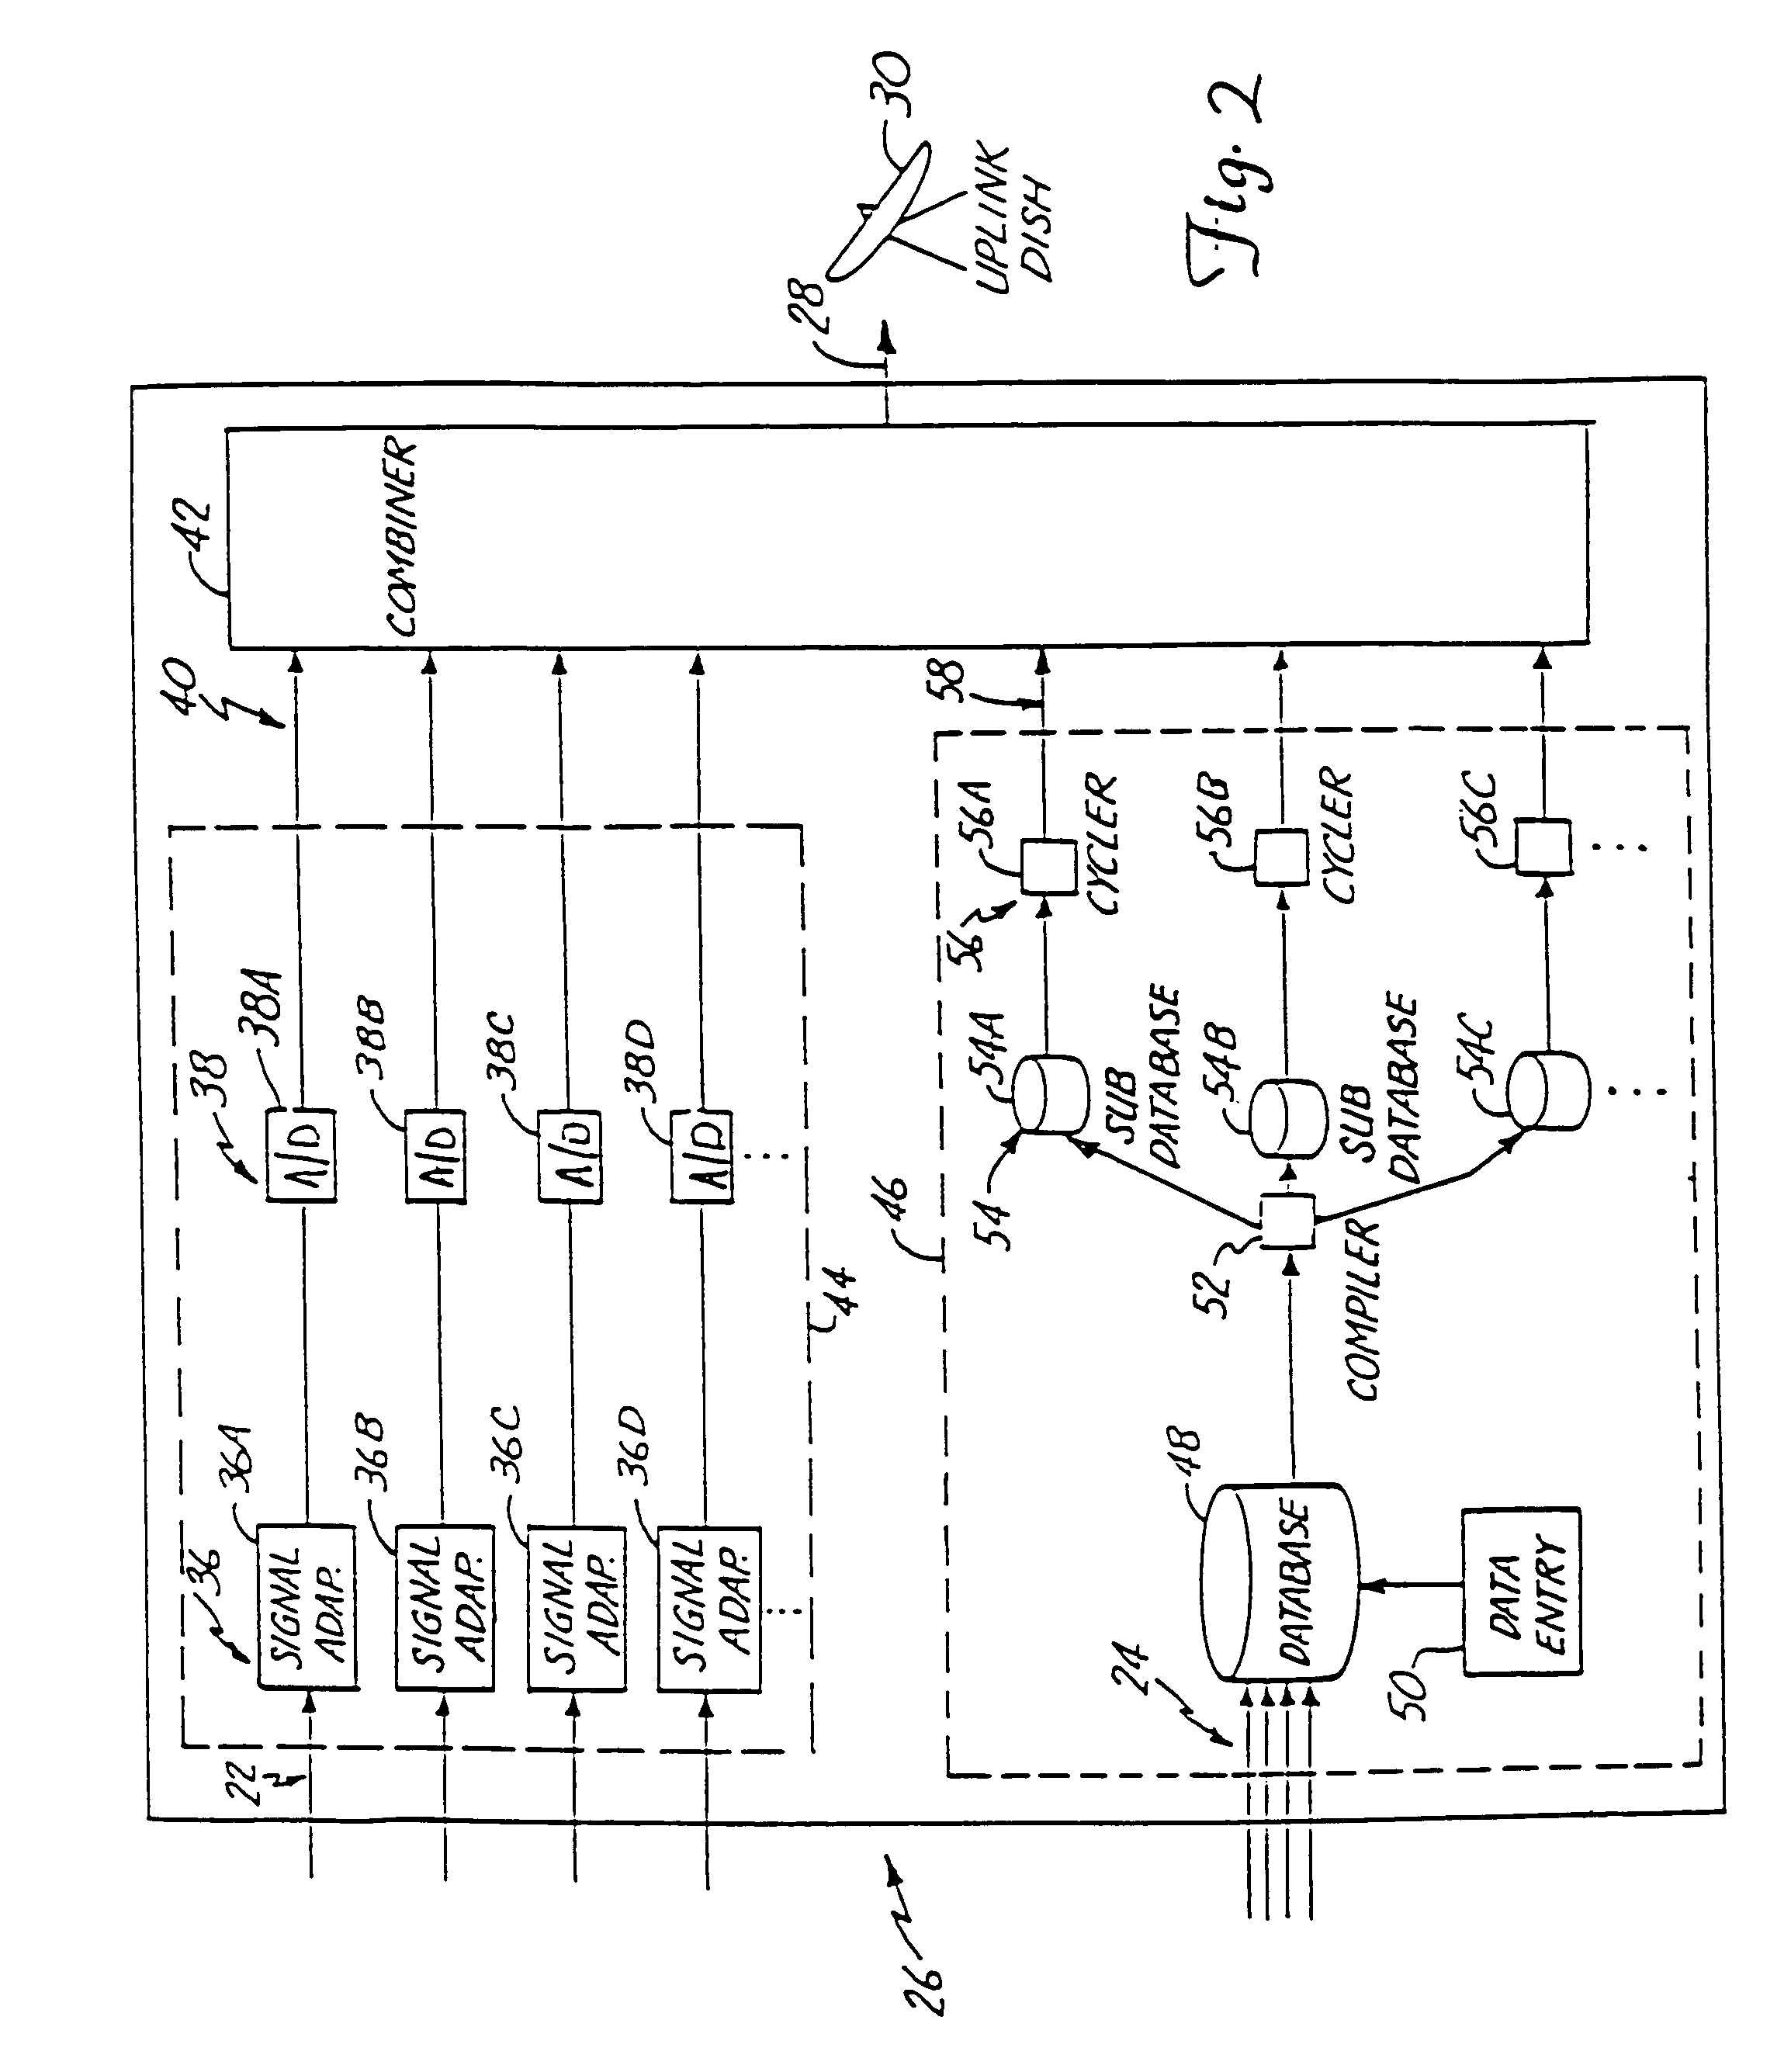 Method and apparatus for transmission, receipt, caching and display of one-way broadcast programming and data